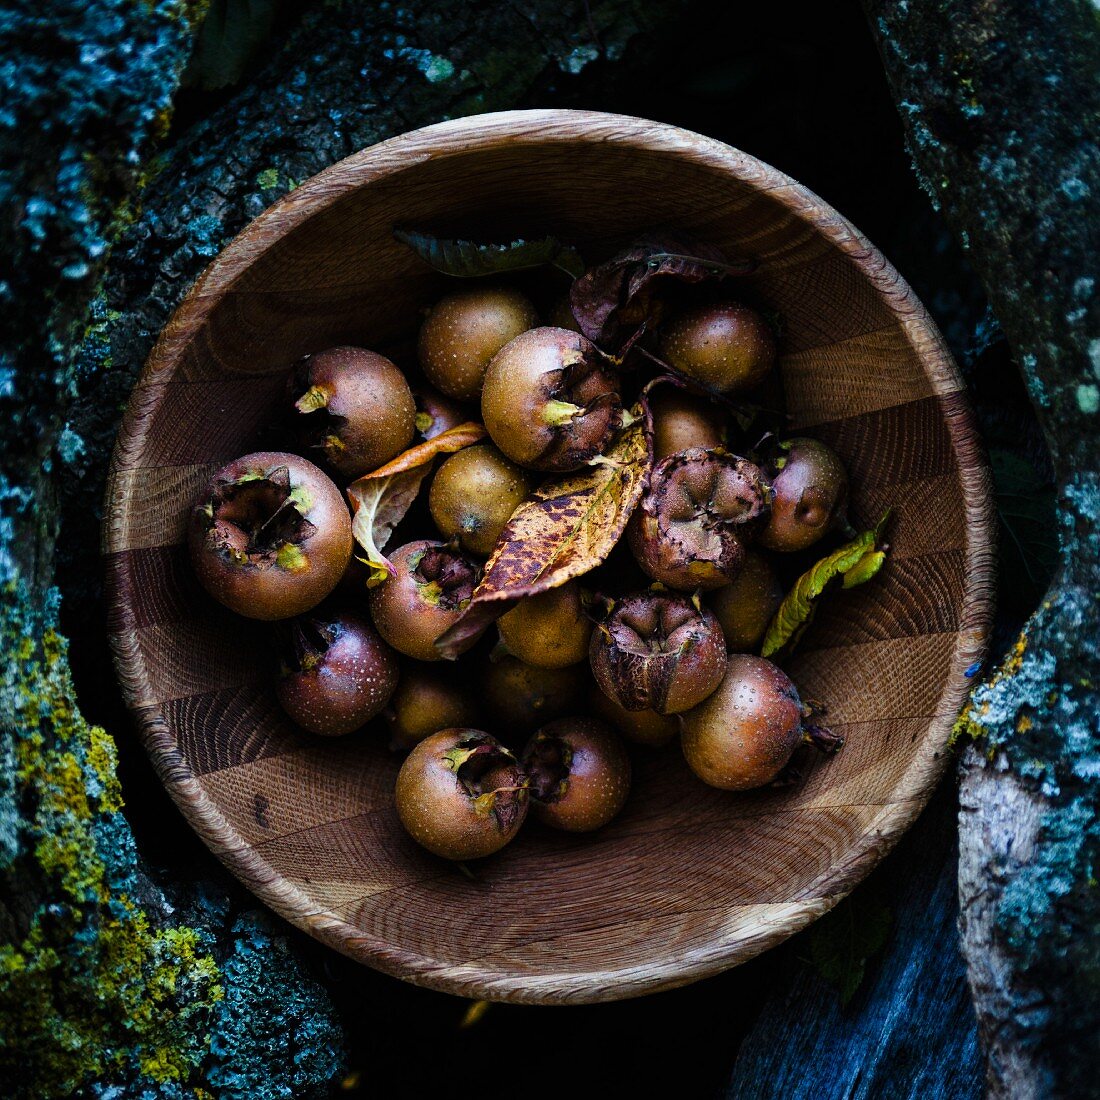 Medlars in a wooden bowl (view from above)